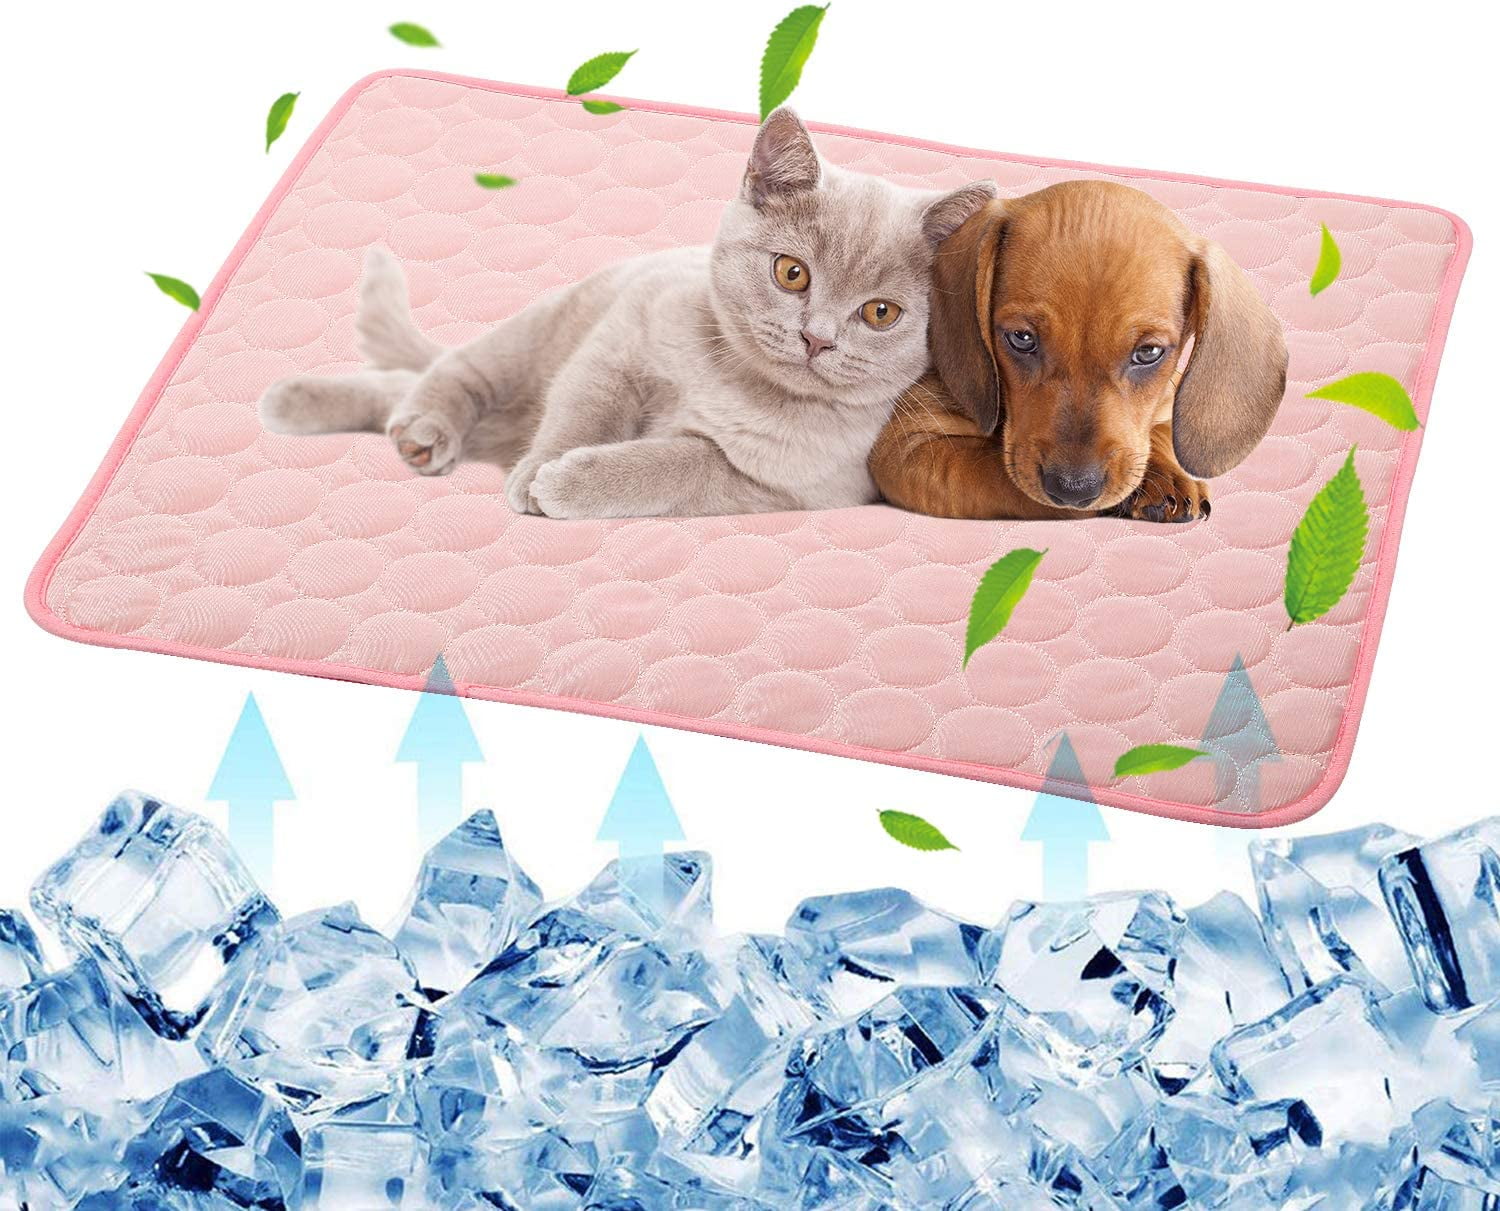 Cooling Mat for Pet,Self Cooling Dog Cat Cooling Mat Cloth Fabric Material Foldable Washable Cooling Pad for Pets Cats Puppy in Hot Summer Sleeping,3 Size Choice S